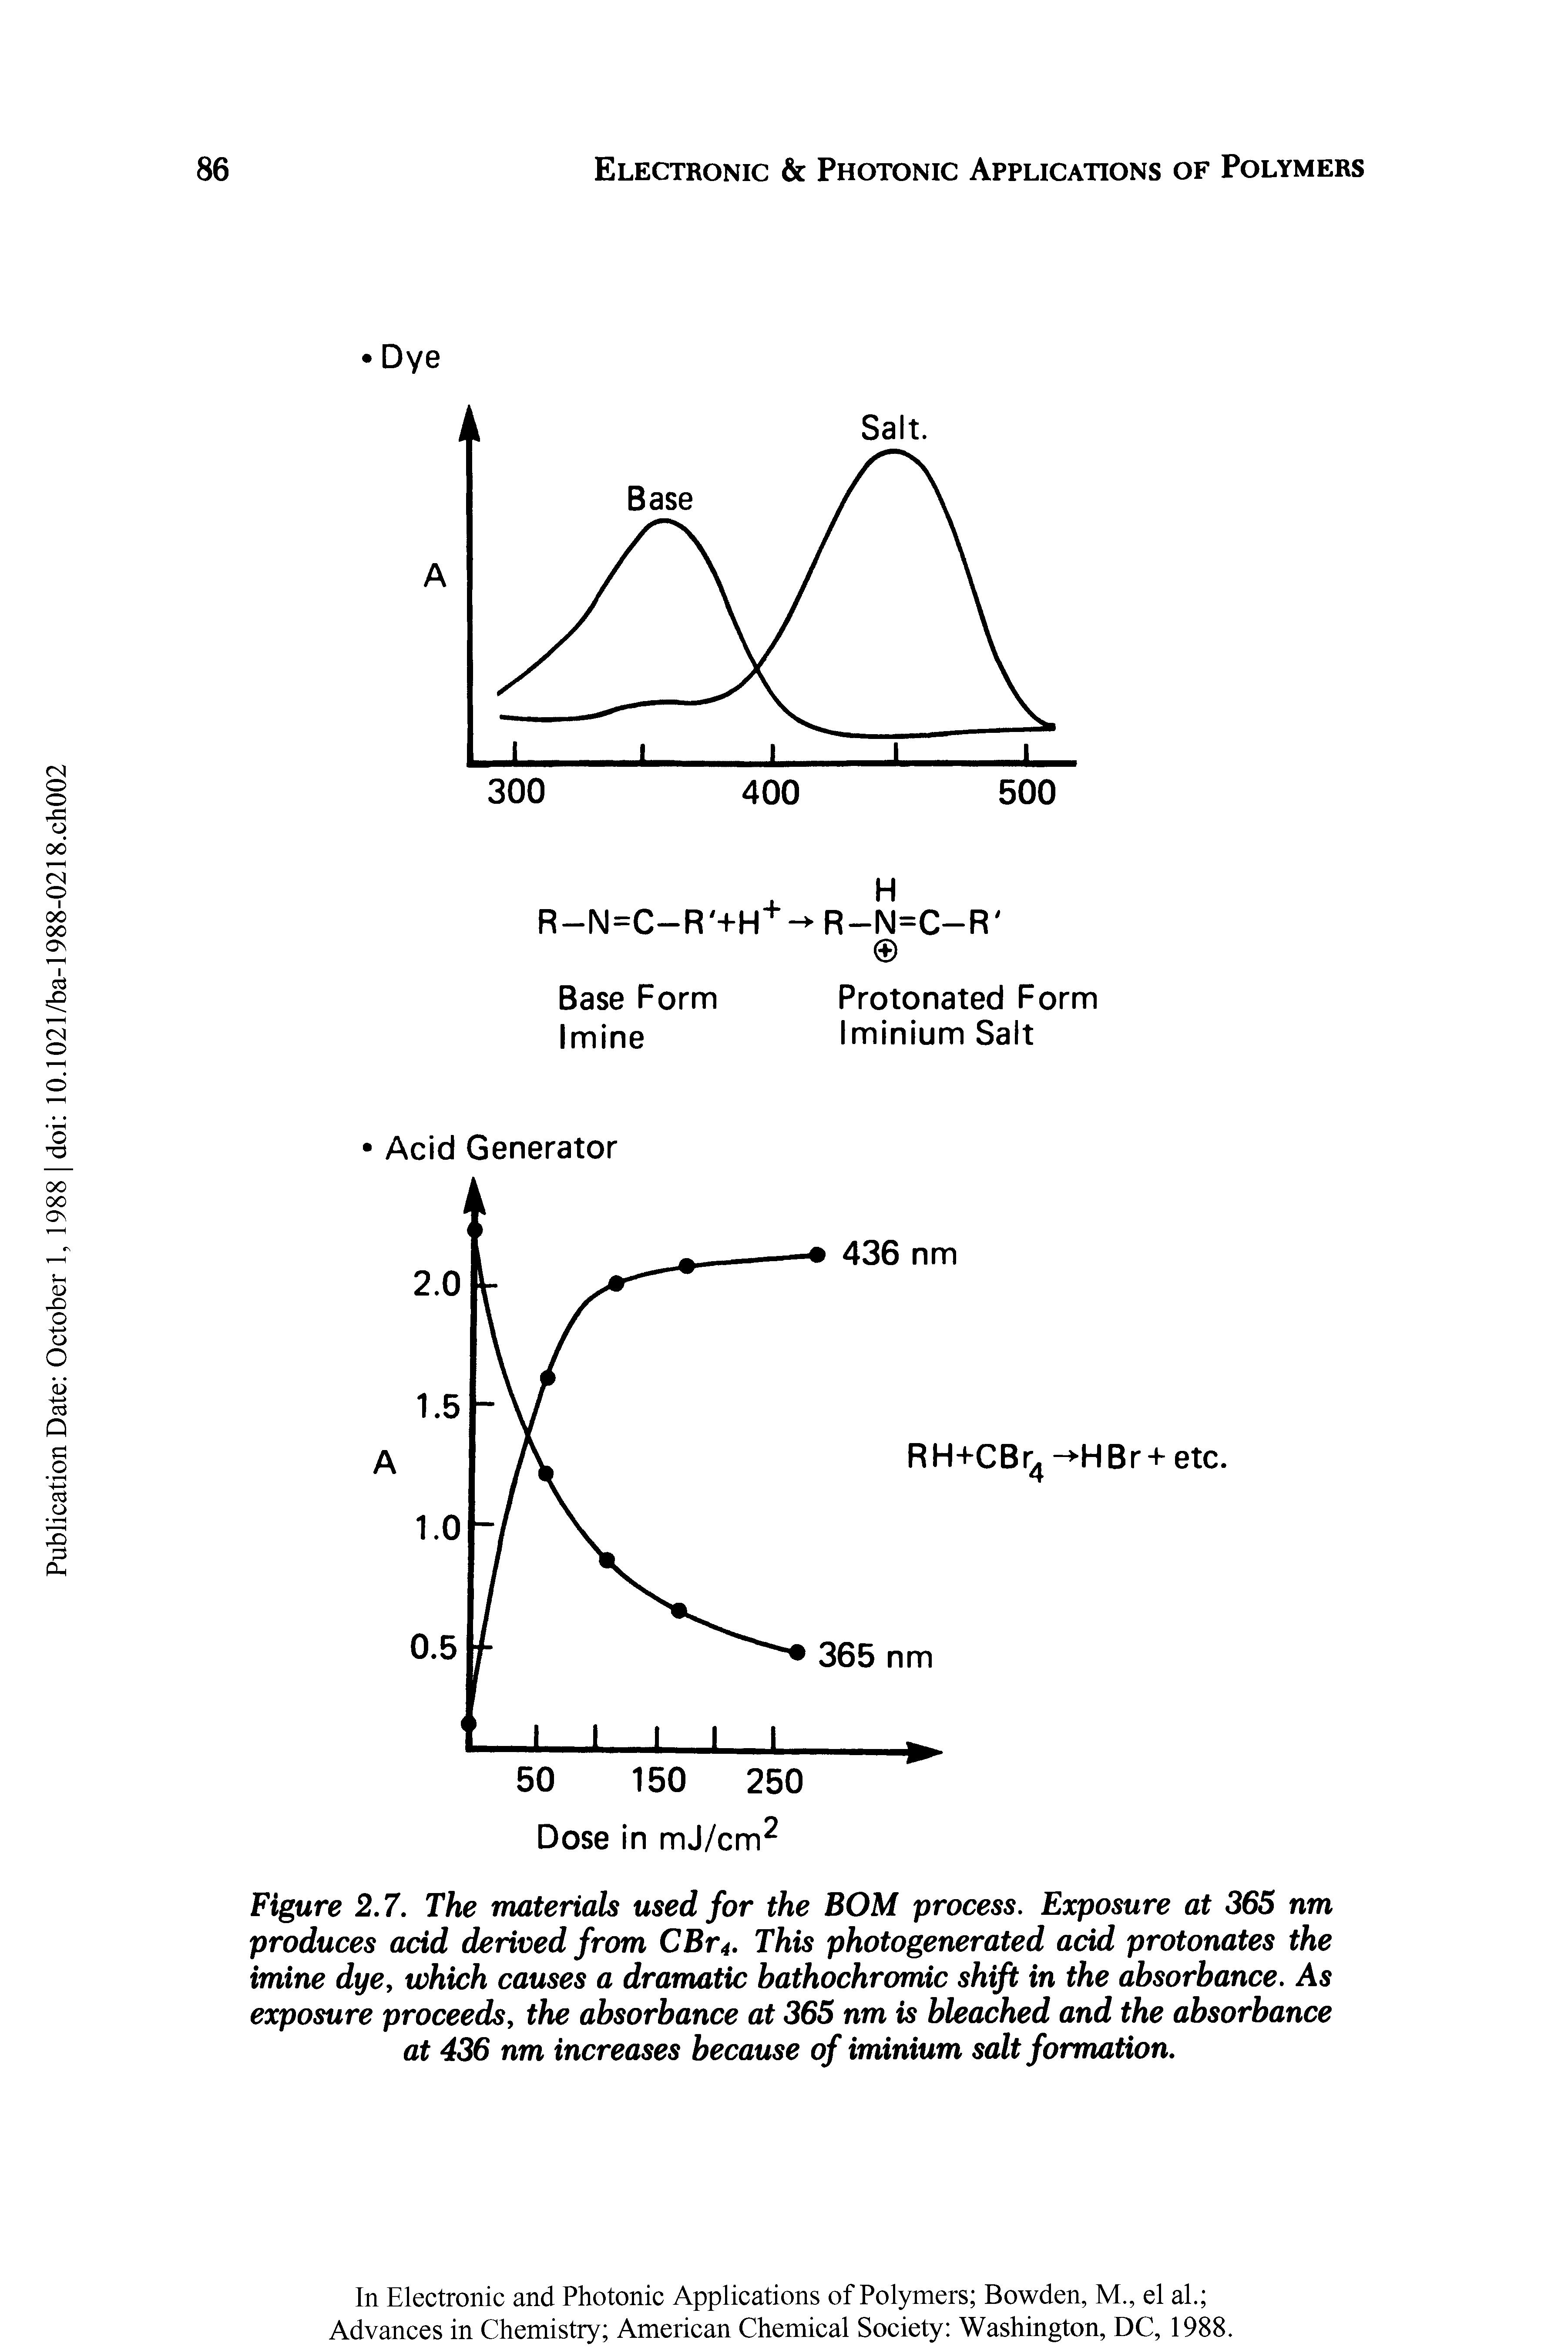 Figure 2.7. The materials used for the BOM process. Exposure at 365 nm produces acid derived from CBr4. This photogenerated acid protonates the imine dye, which causes a dramatic hathochromic shift in the absorbance. As exposure proceeds, the absorbance at 365 nm is bleached and the absorbance at 436 nm increases because of iminium salt formation.